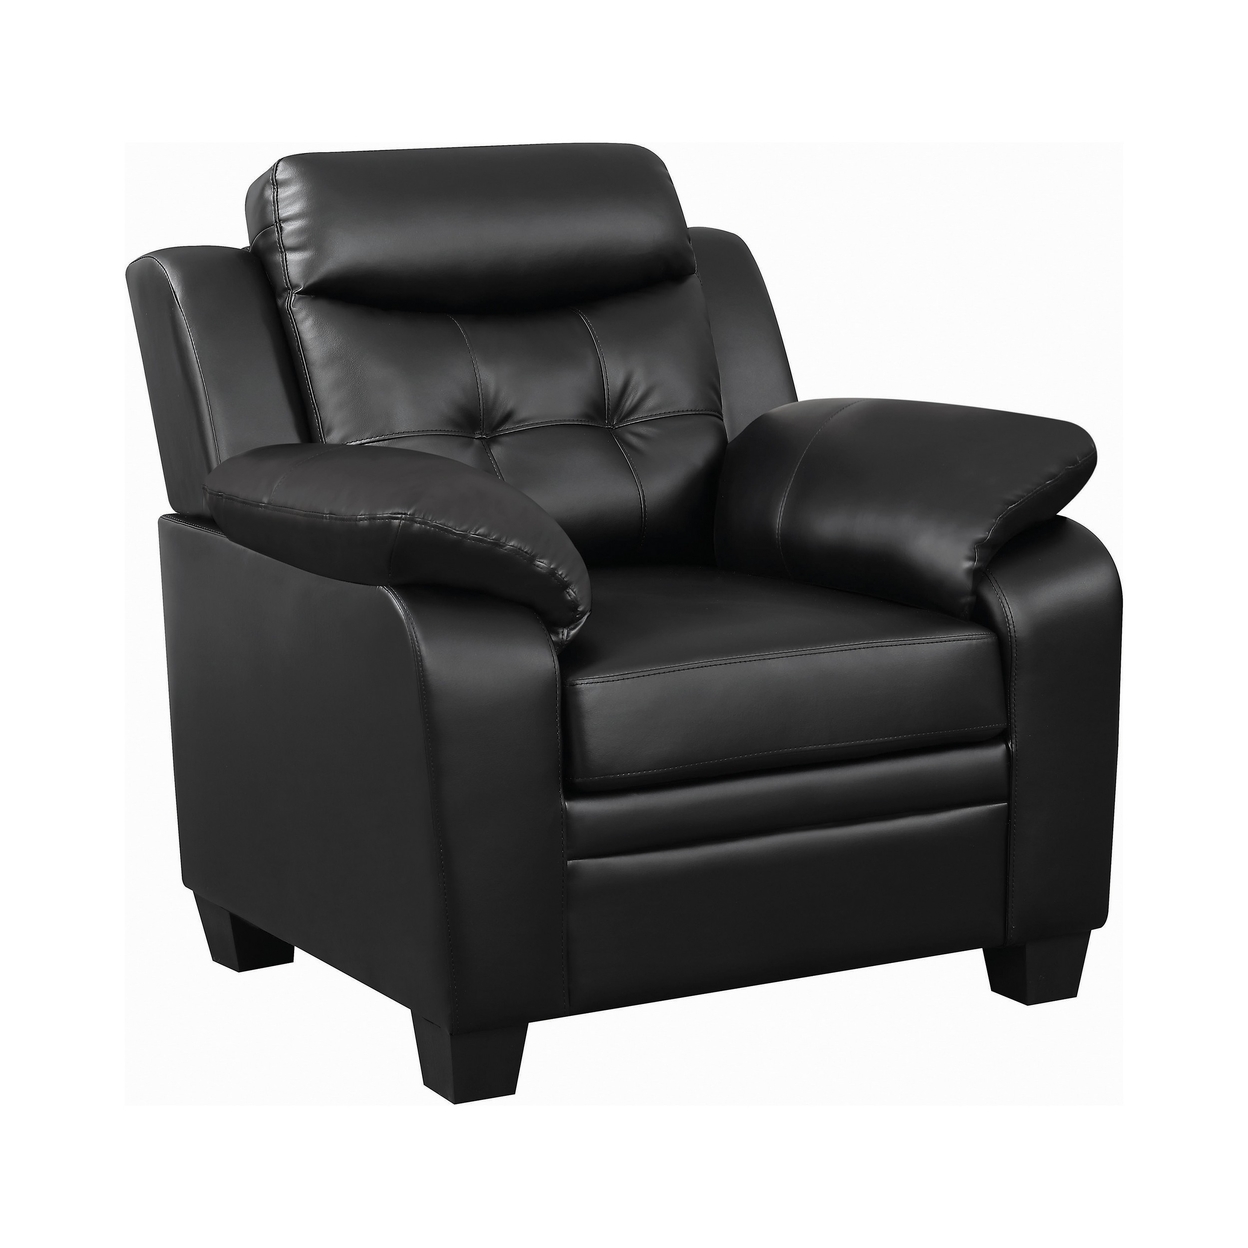 Finley Tufted Upholstered Chair Black - image 1 of 5